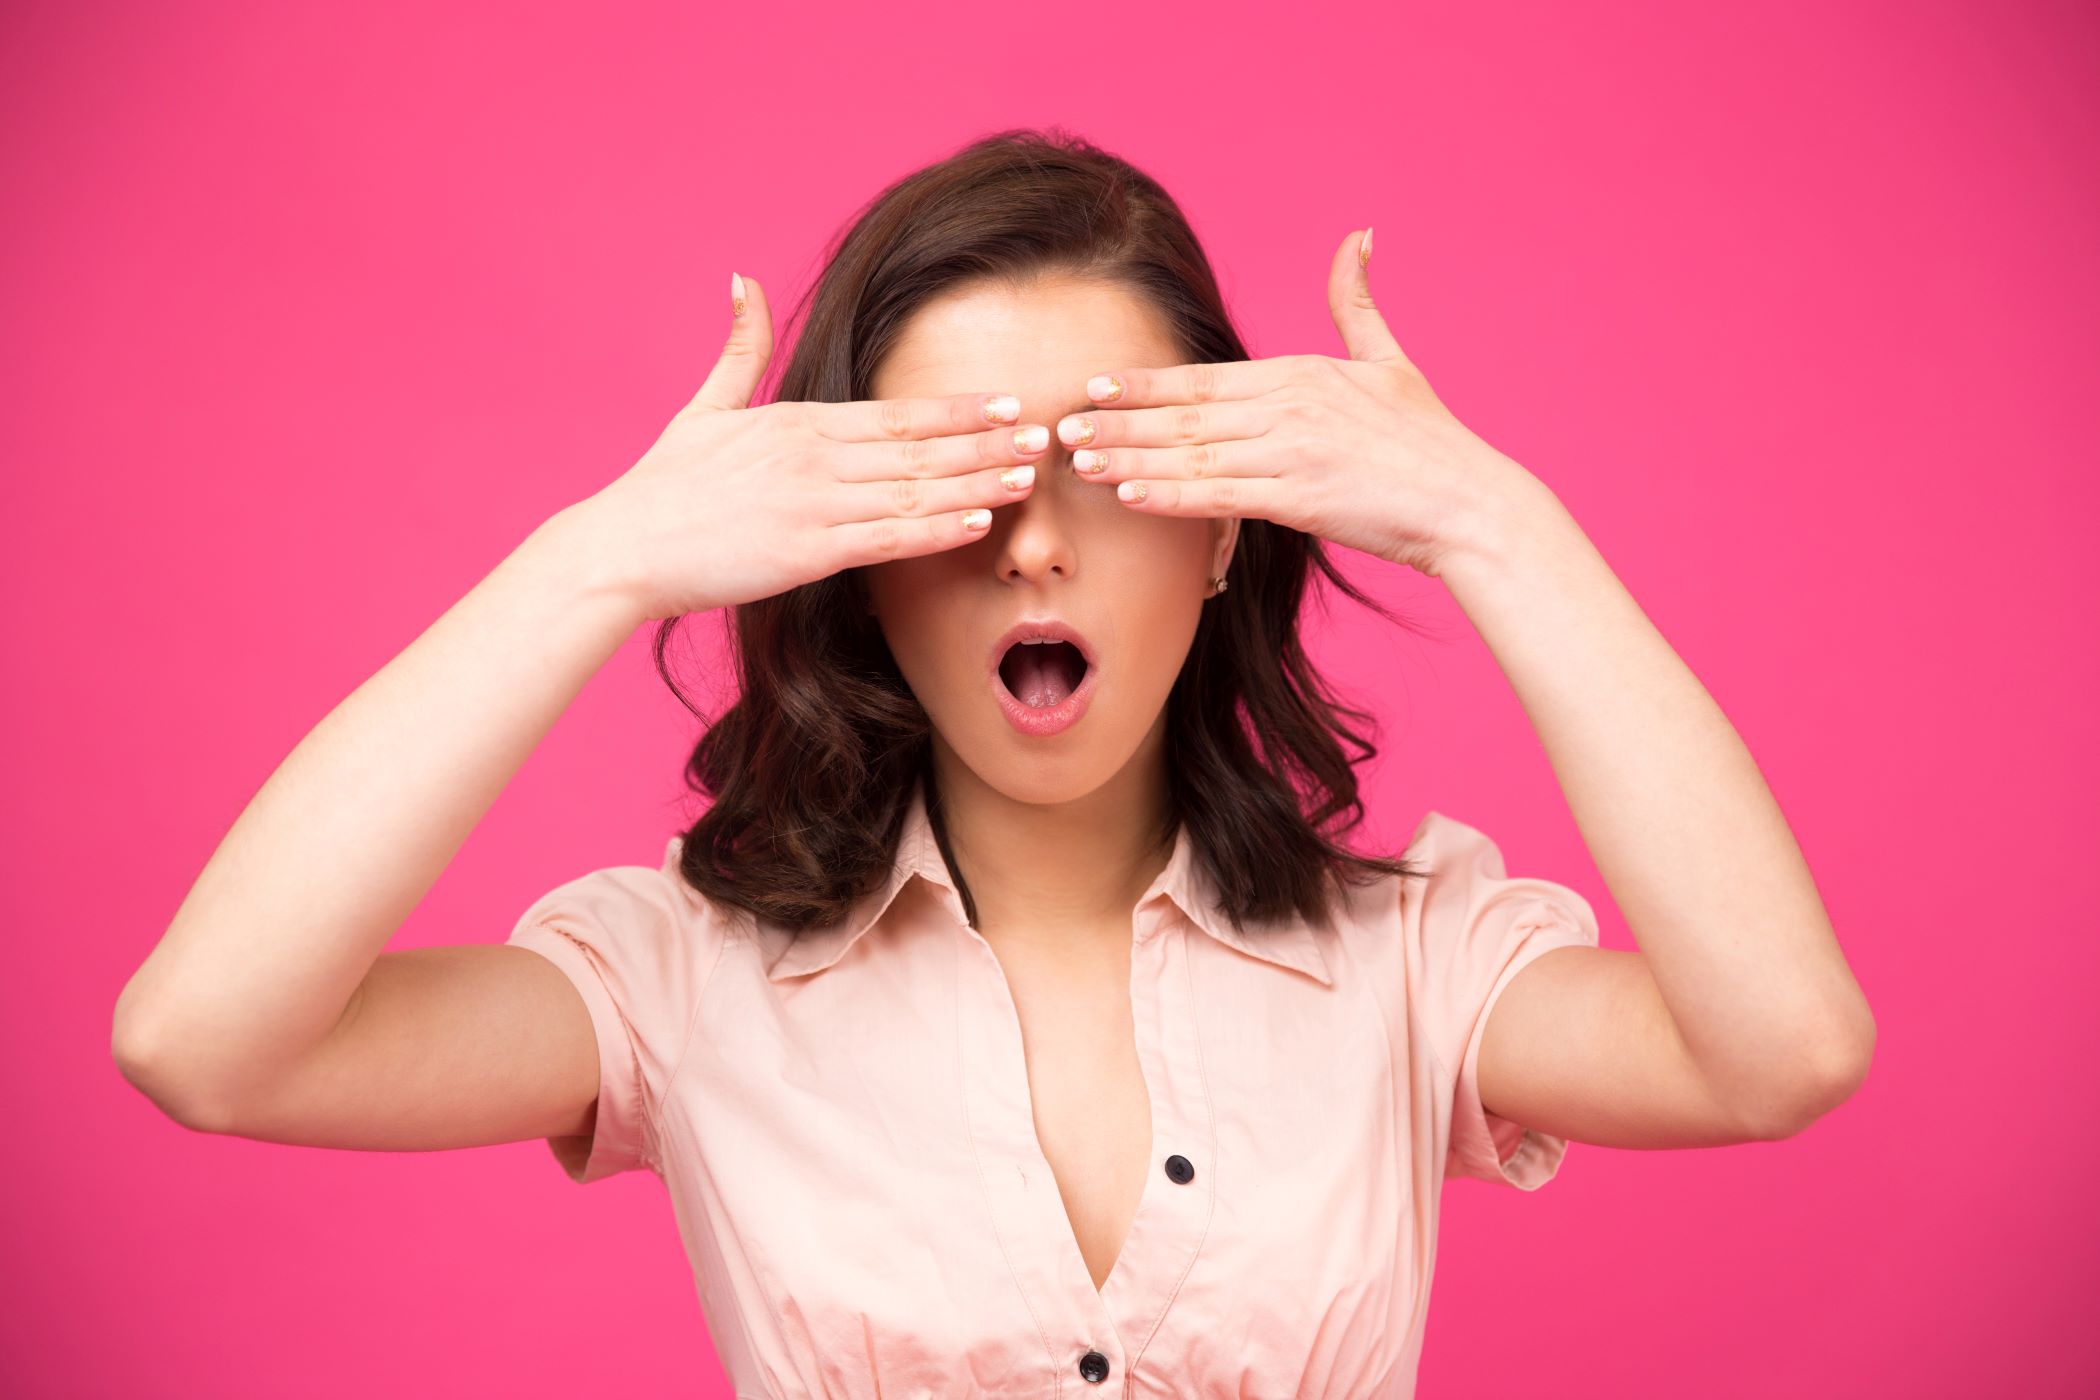 Woman covering her eyes with hands against pink background